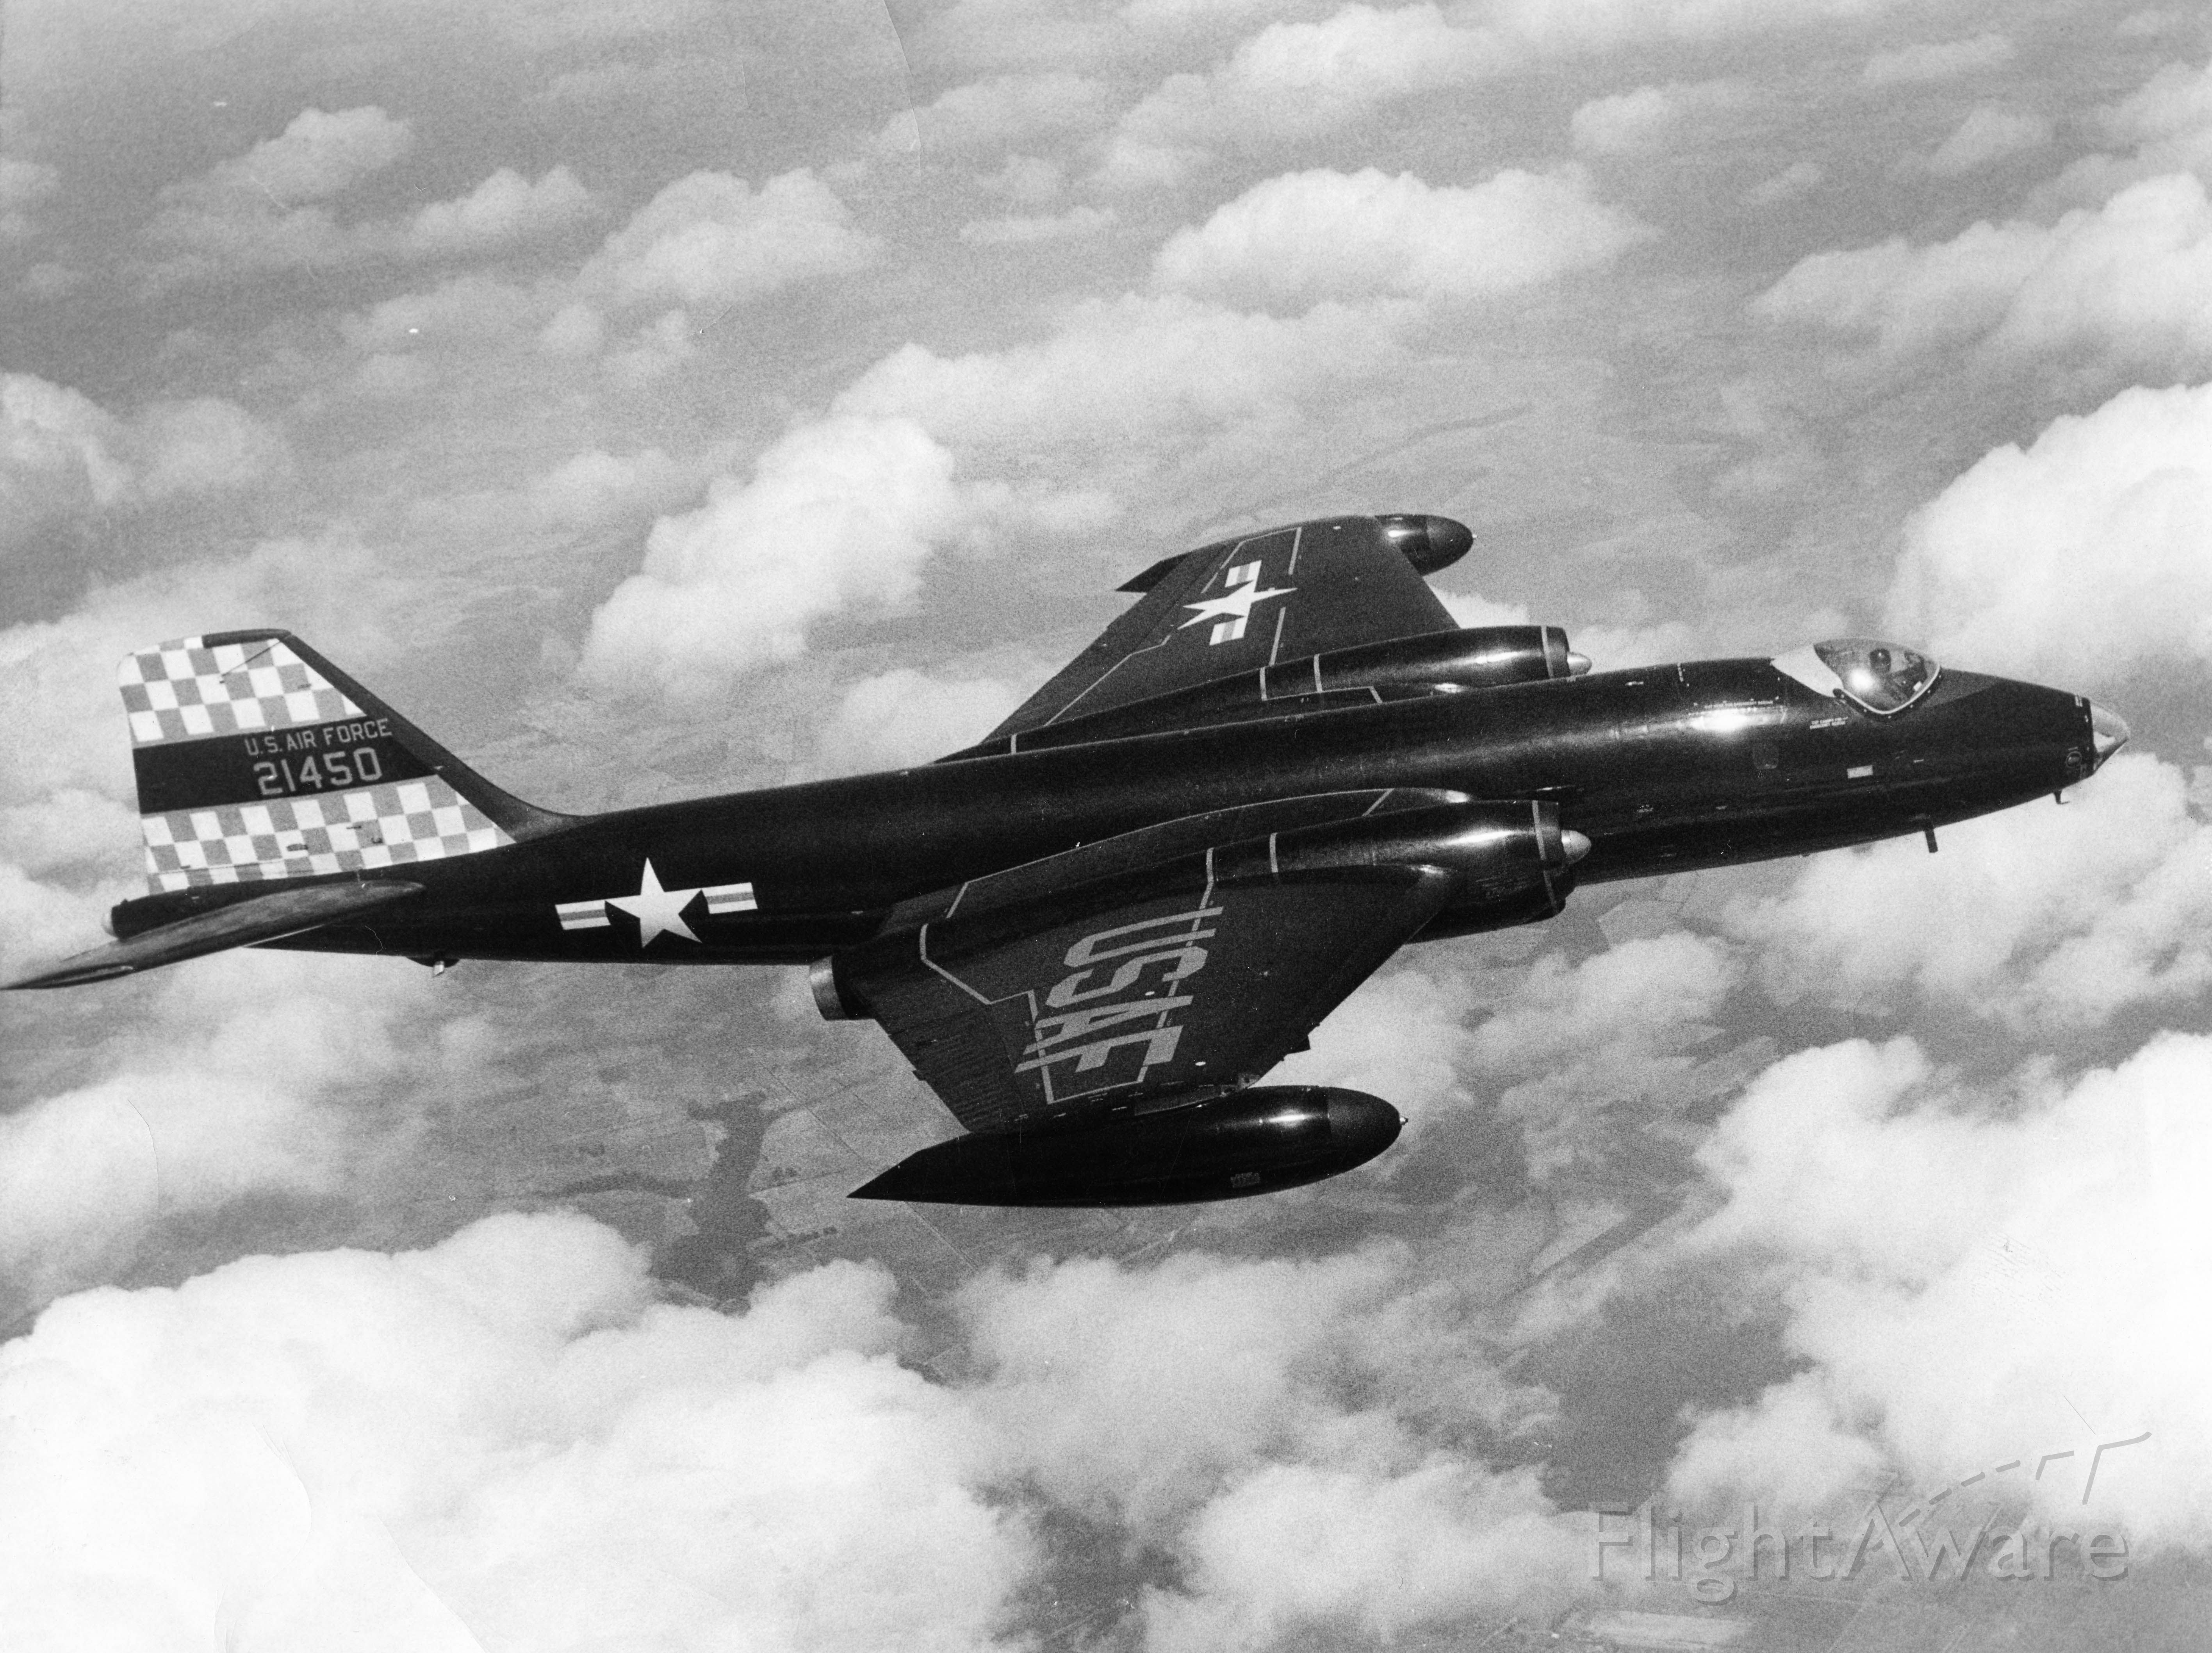 — — - Martin RB-57A #52-450 16th TRS. Shaw AFB, 1954. Squadron flew day/night photo recce missions. Red and white checkerboard  on vertical stab. Wish i had color photos of this- no luck. This variant did NOT deploy to SE Asia. "B" models went there early in the conflict.